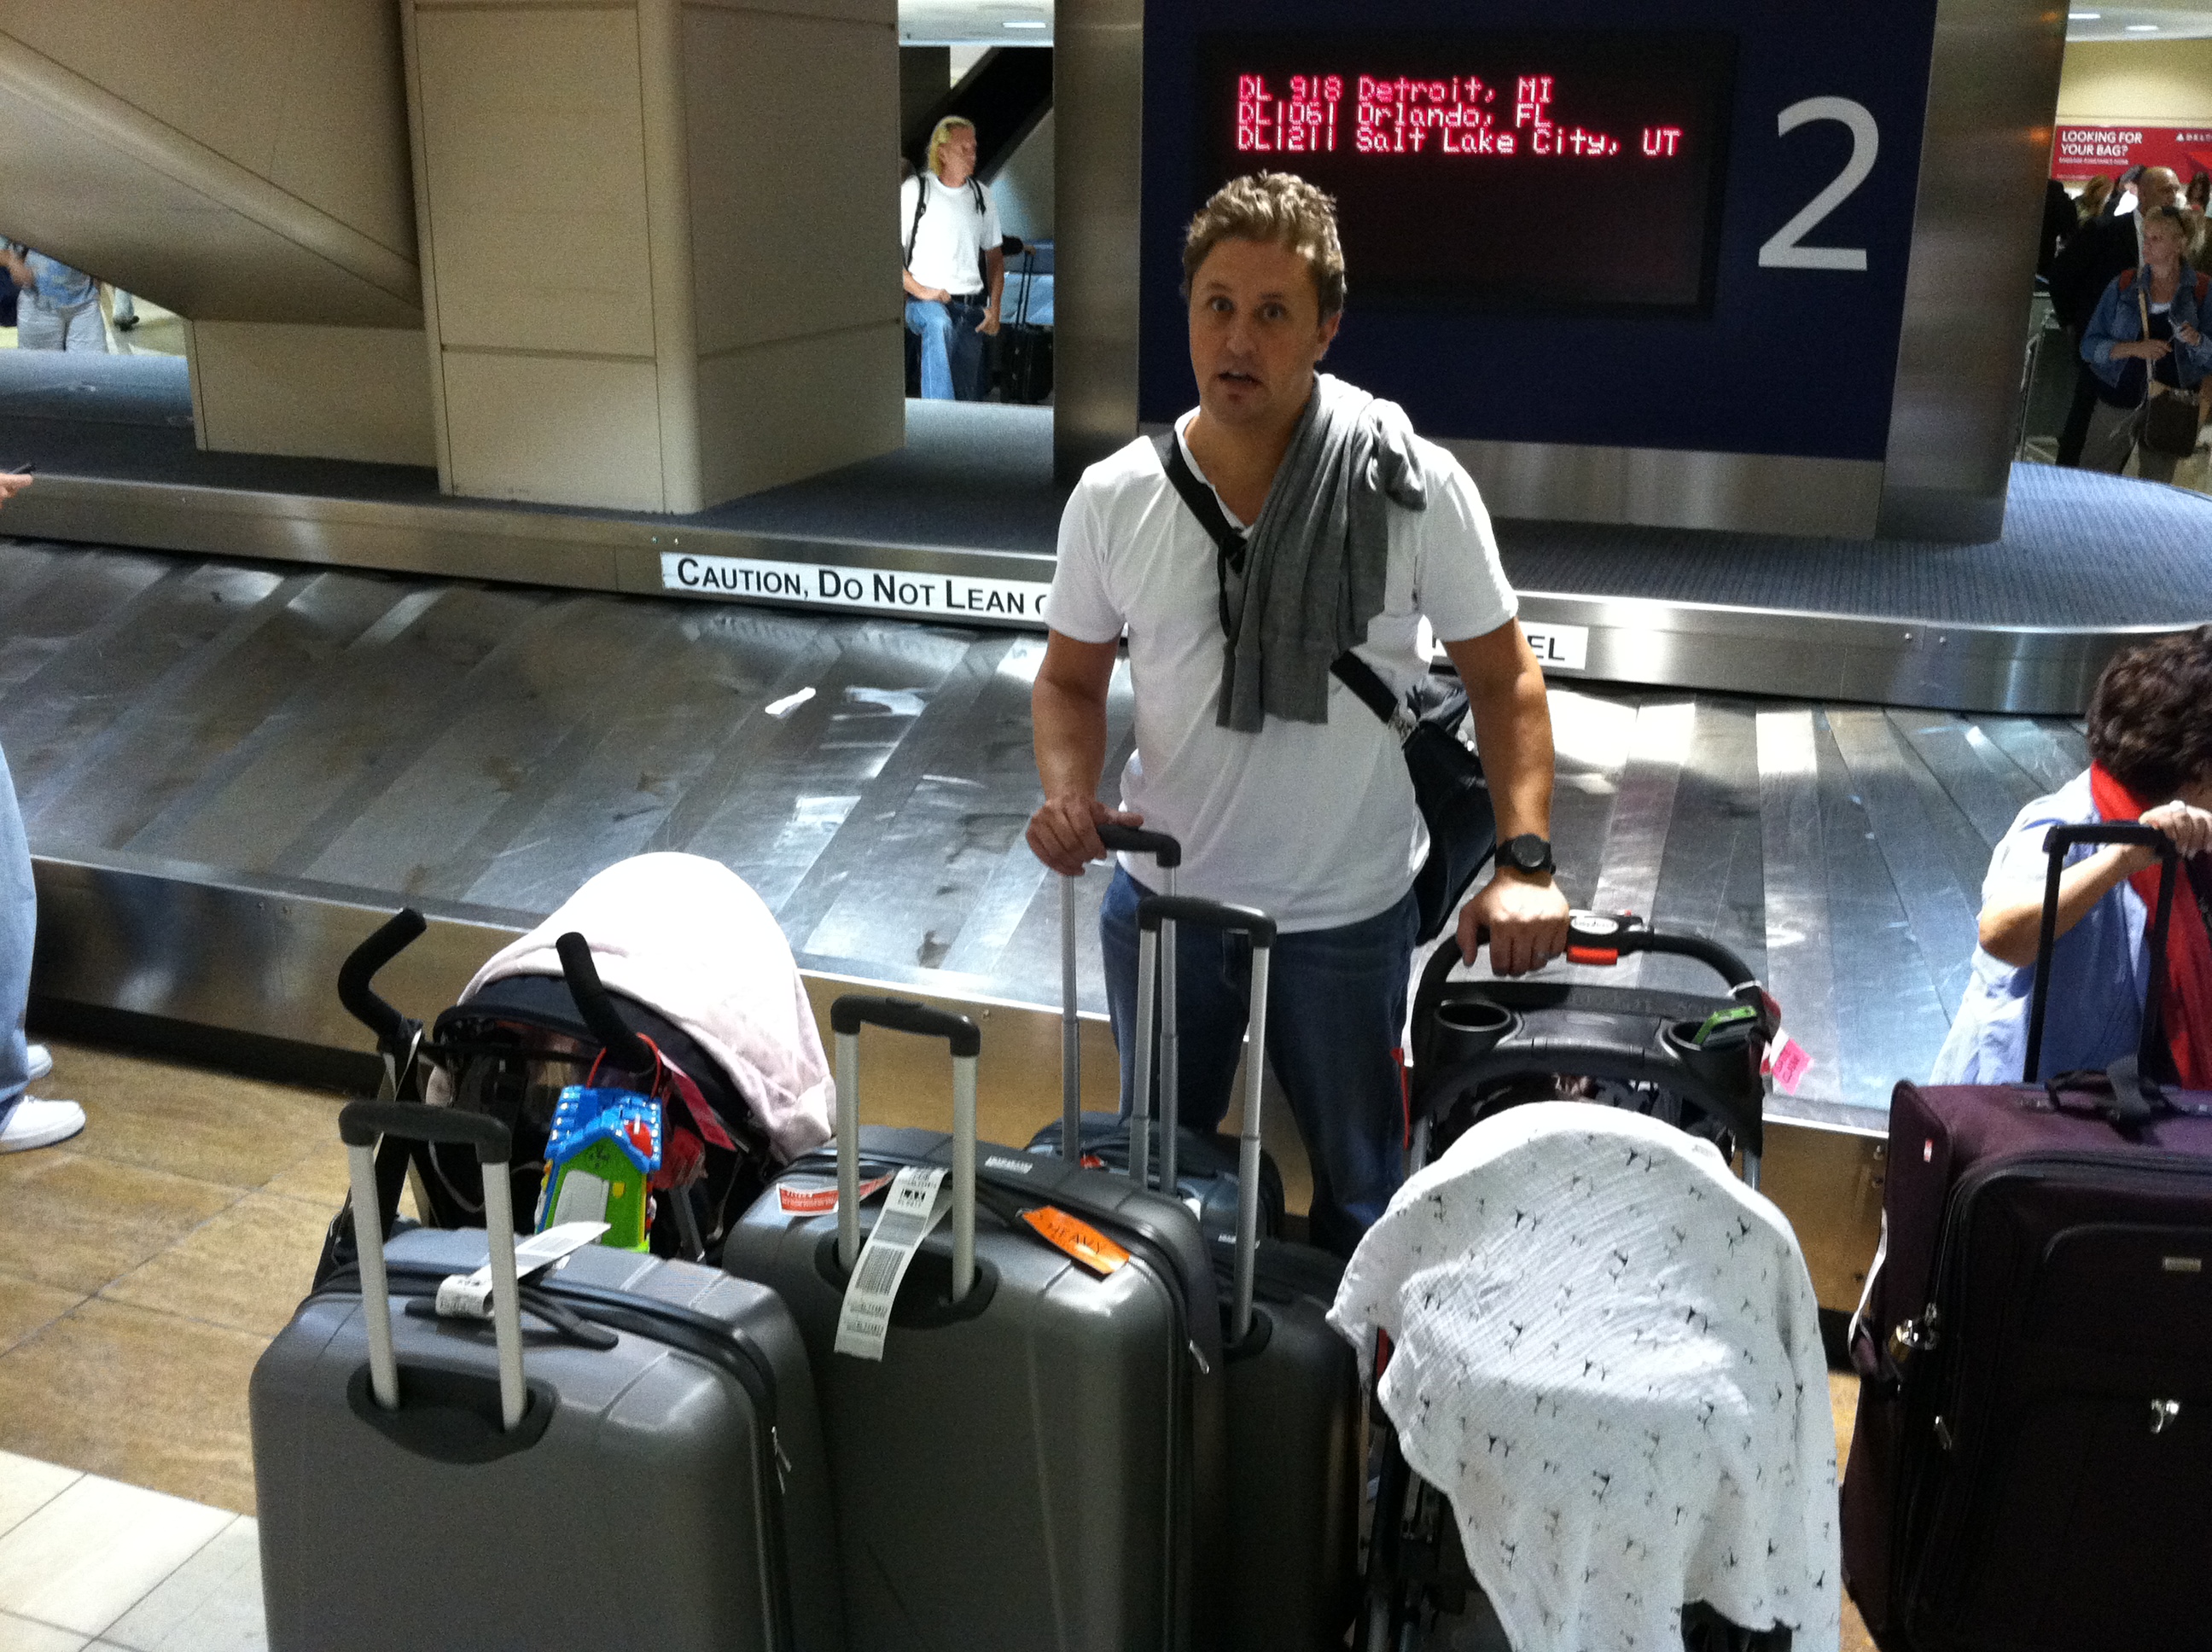 DIDS-20-adrian-with-luggage-at-airport